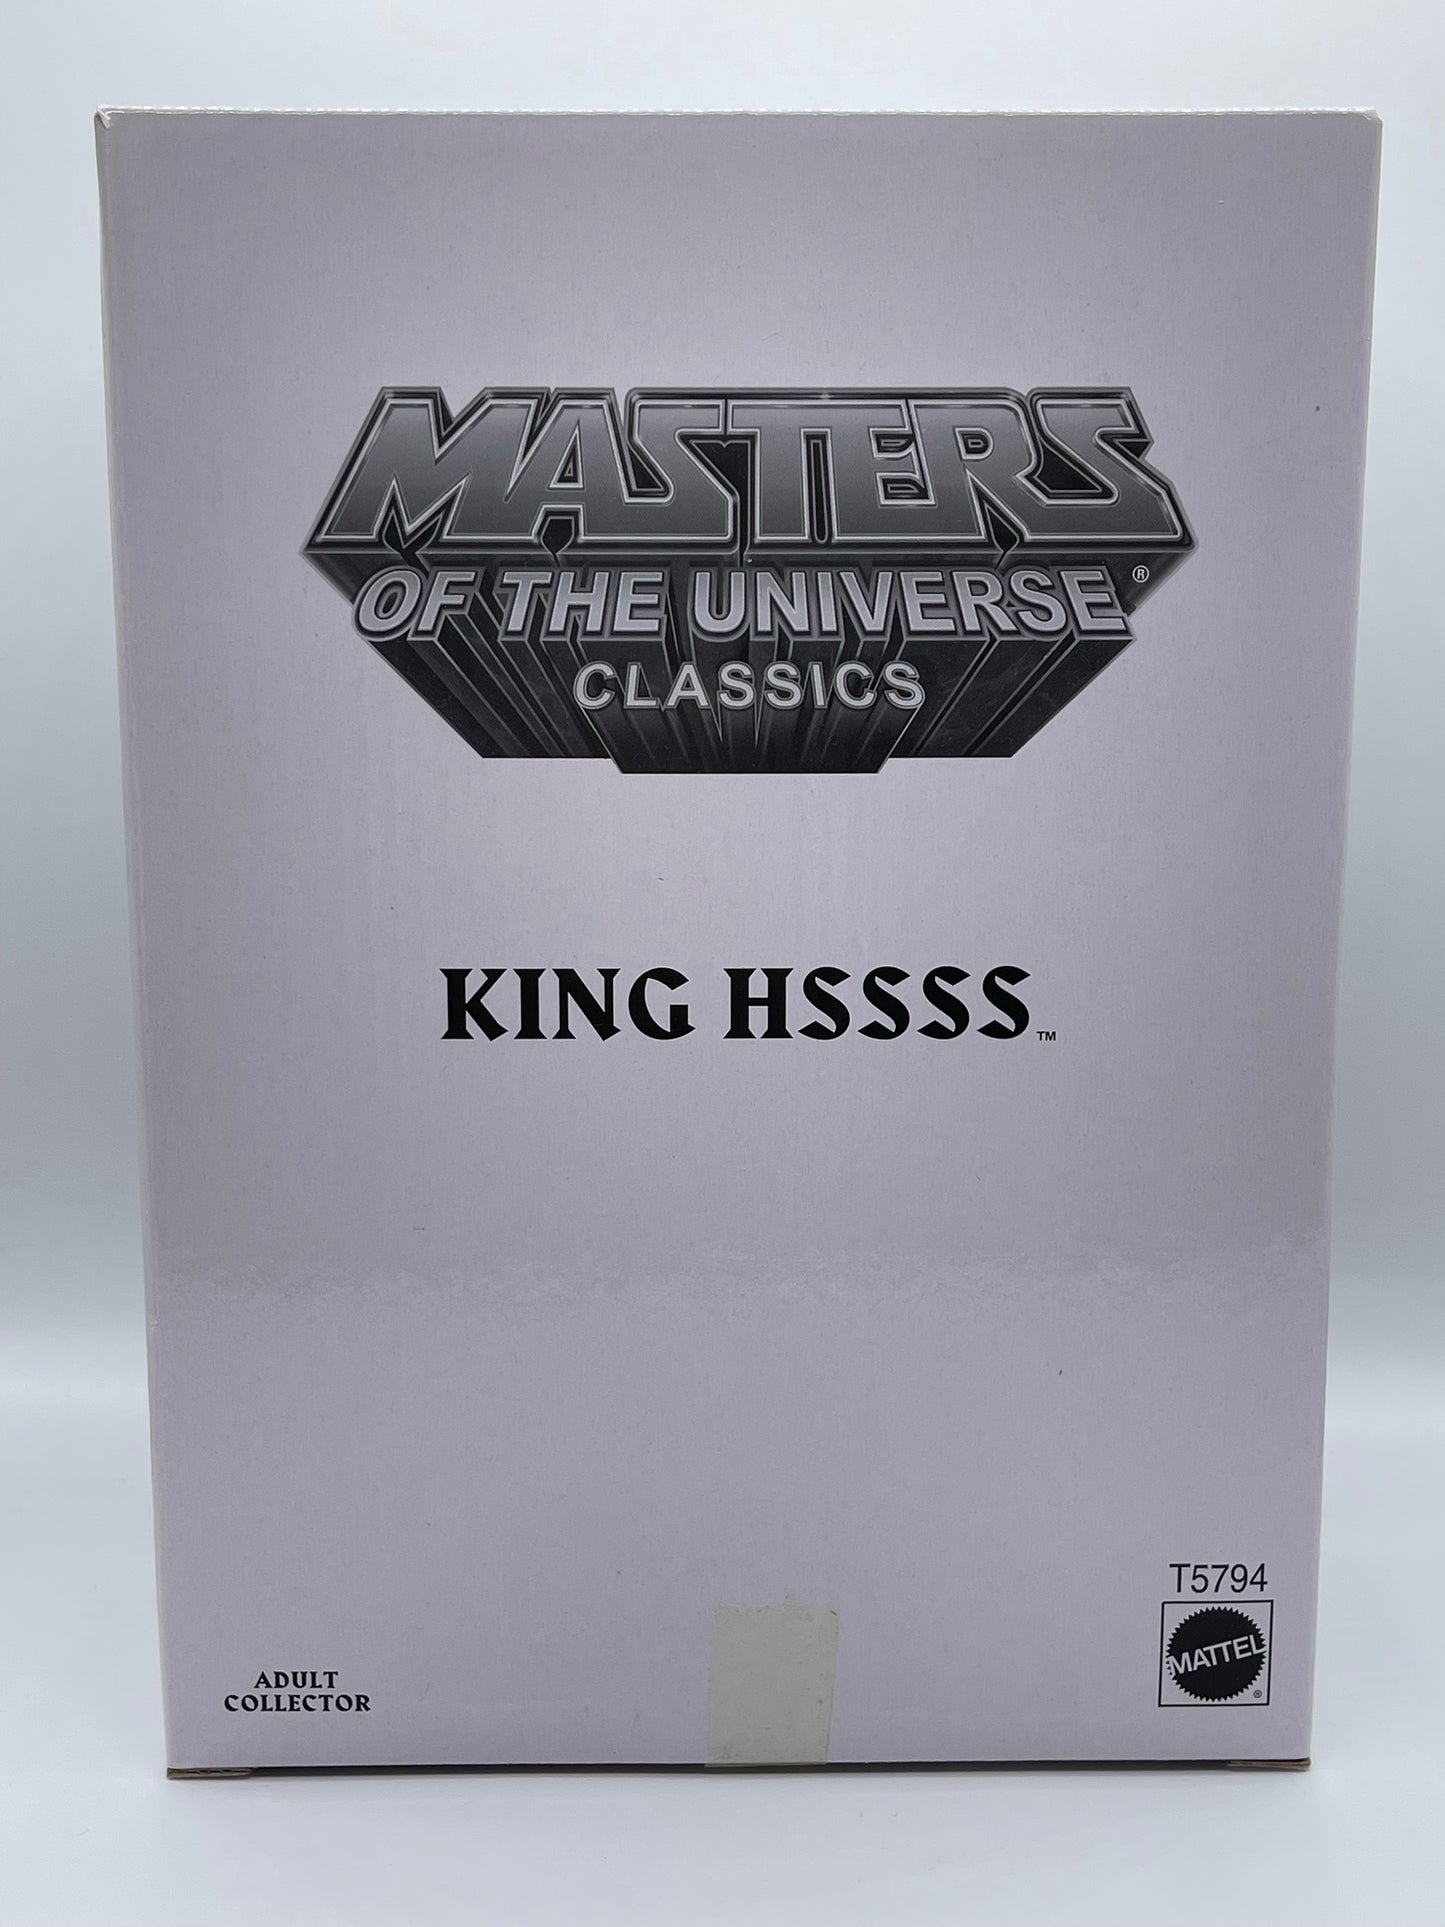 Masters of the Universe Classics King Hssss